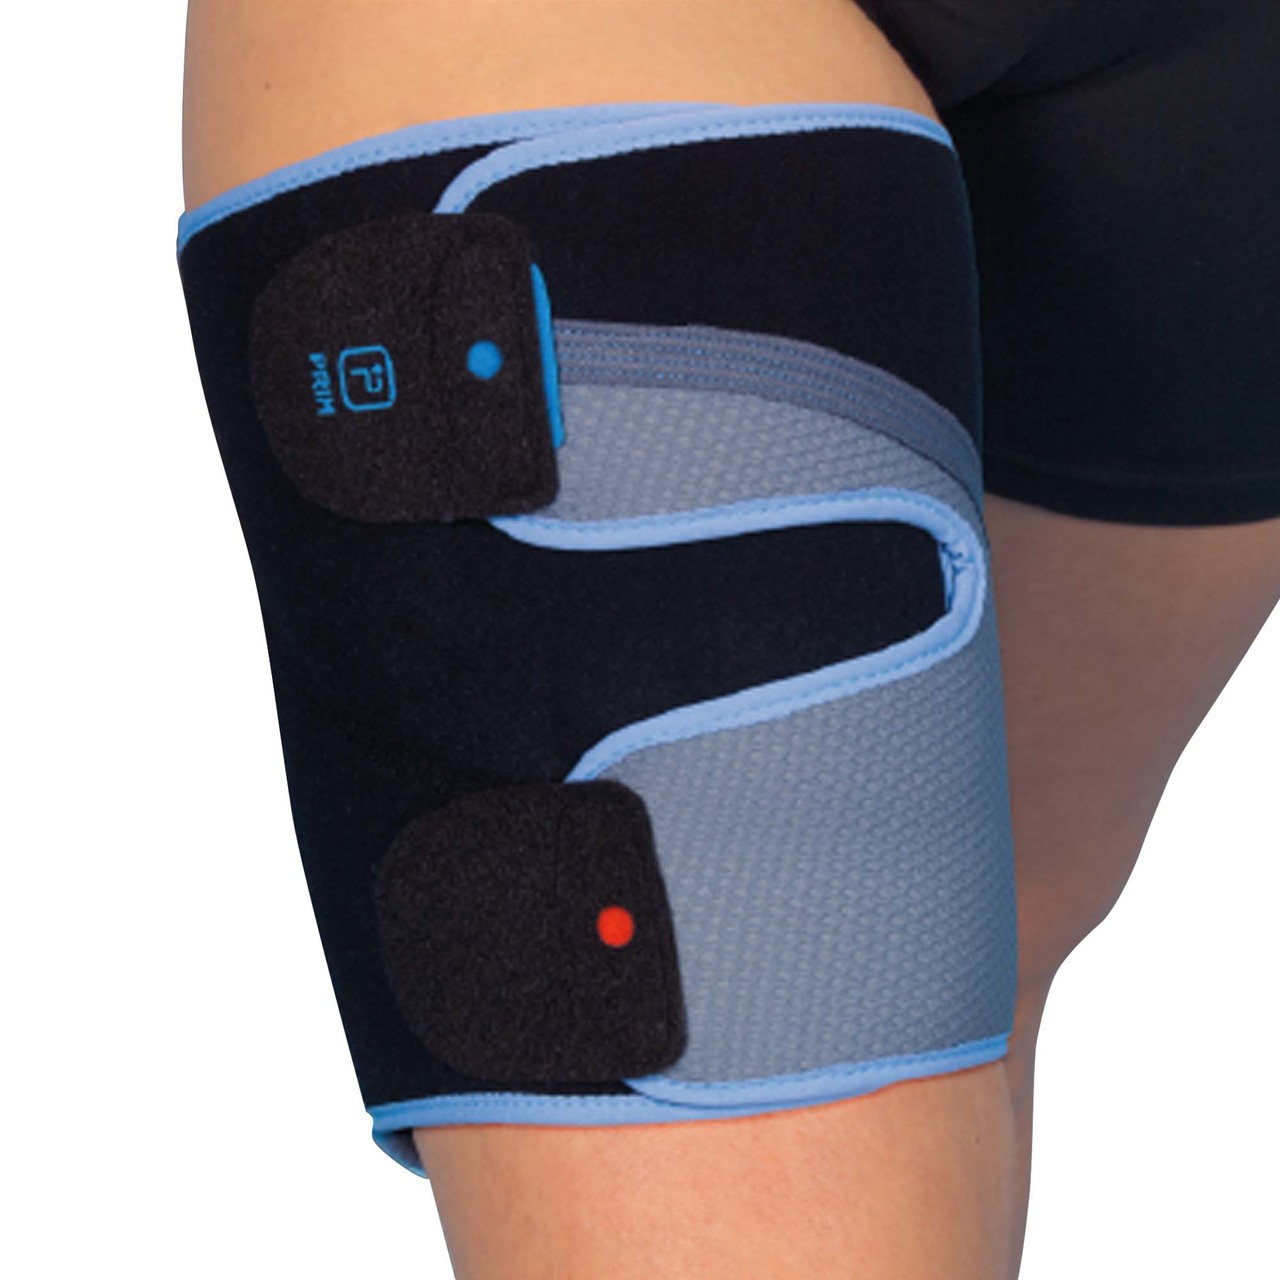 Thigh Support